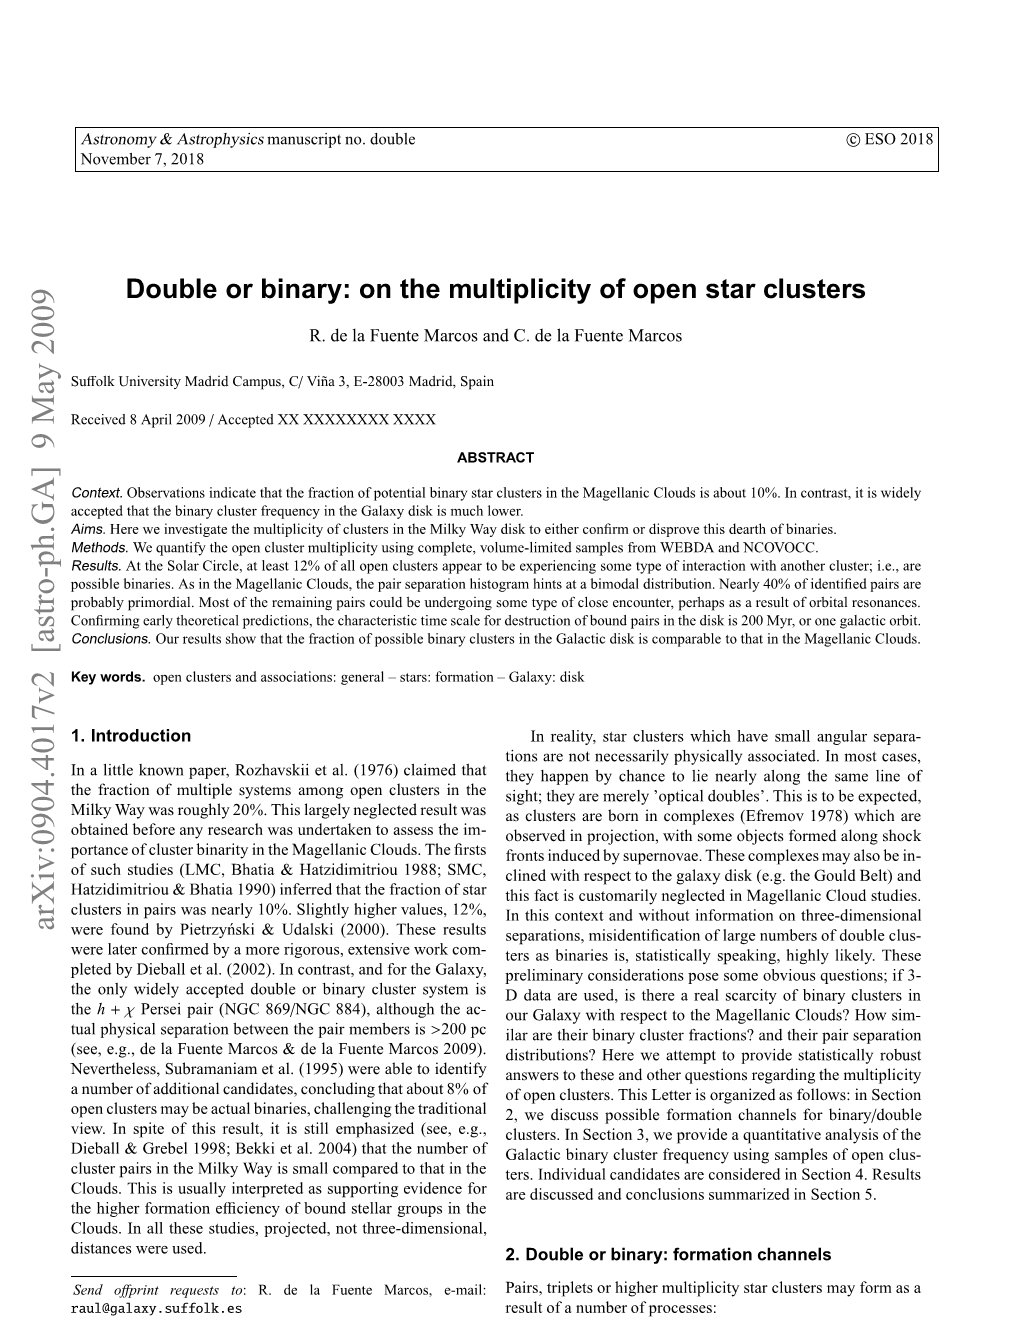 Double Or Binary: on the Multiplicity of Open Star Clusters